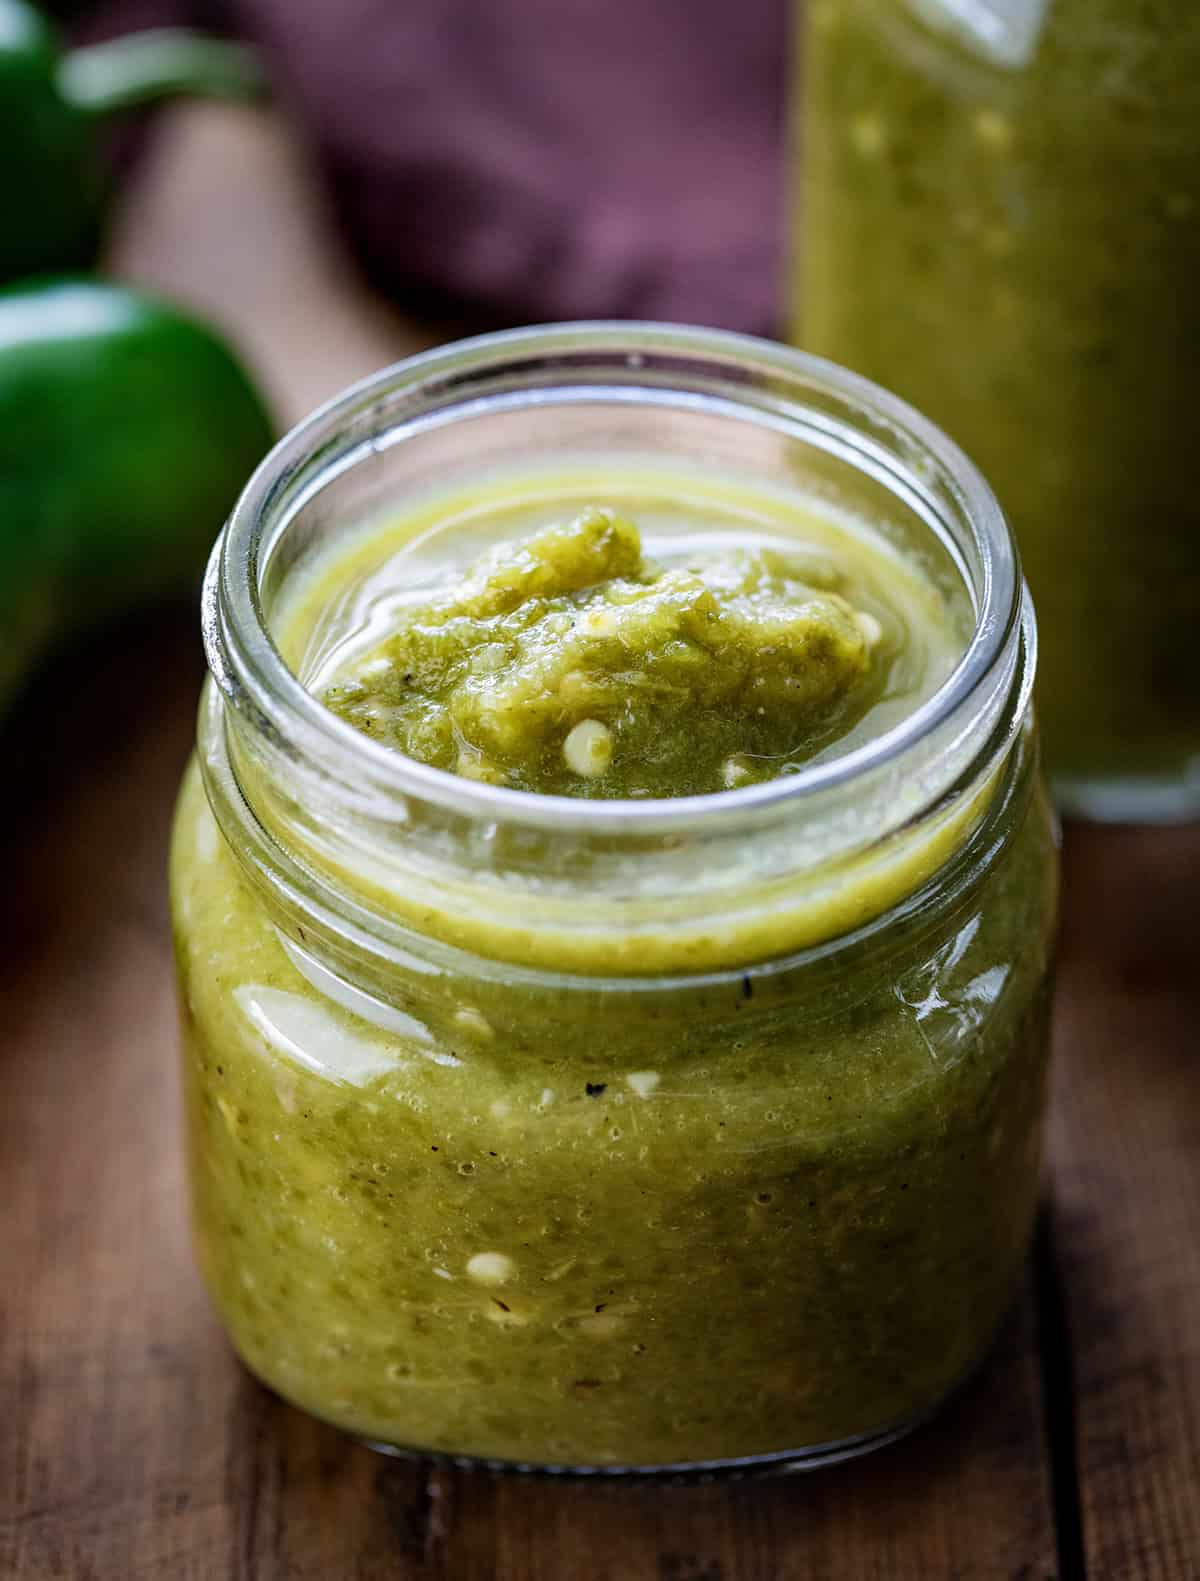 Jar of Jalapeno Hot Sauce on a wooden table.